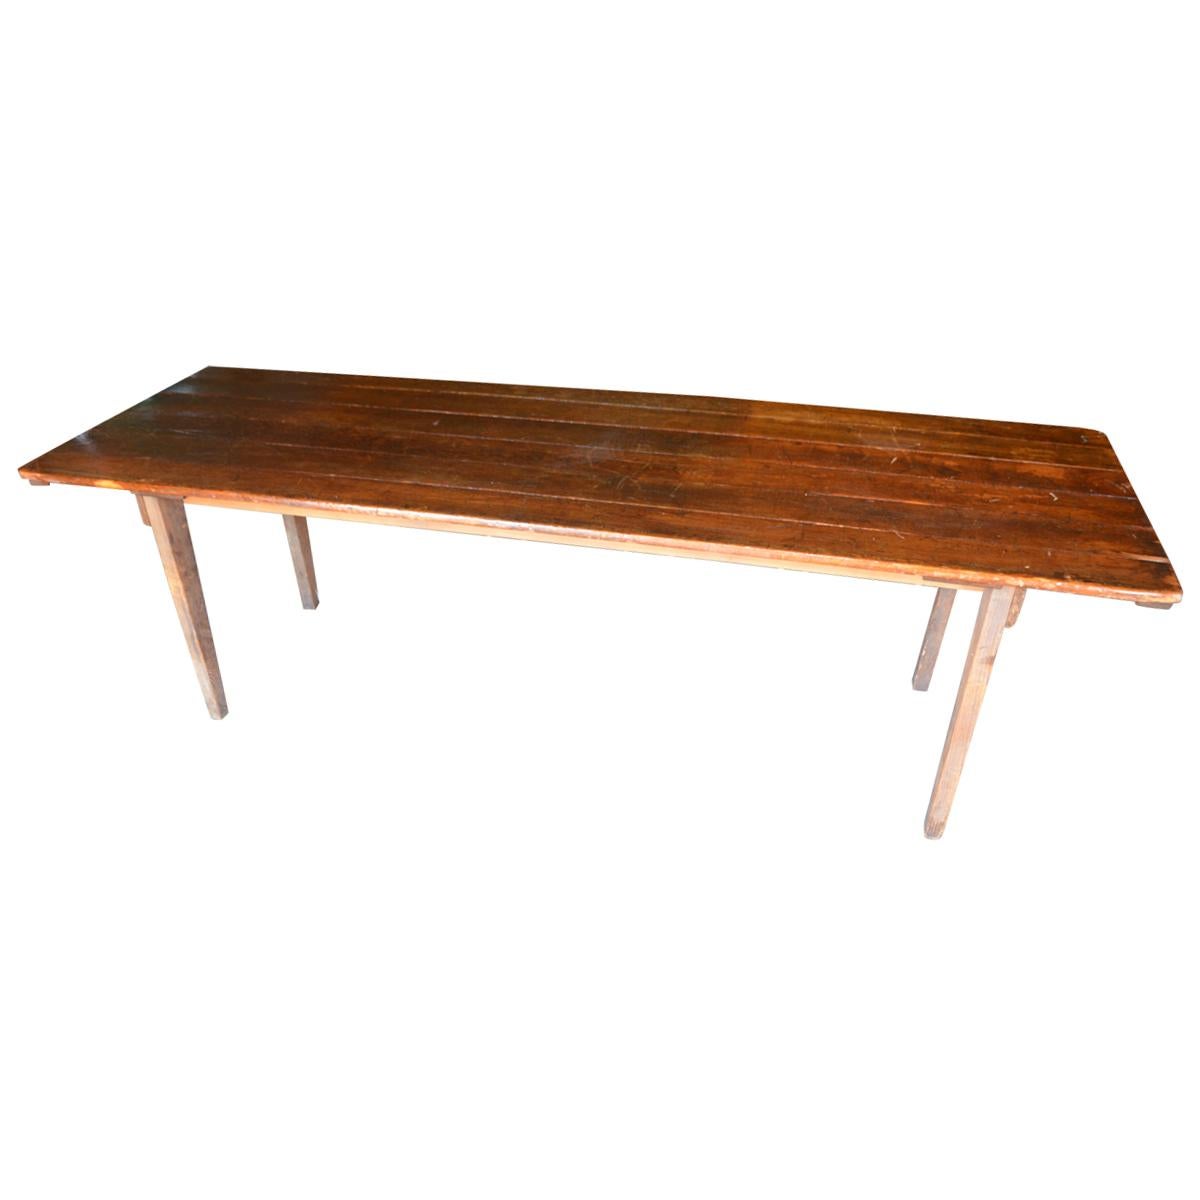 Harvest Table Handmade of Pine, Early 1900s, Legs Fold to Store For Sale